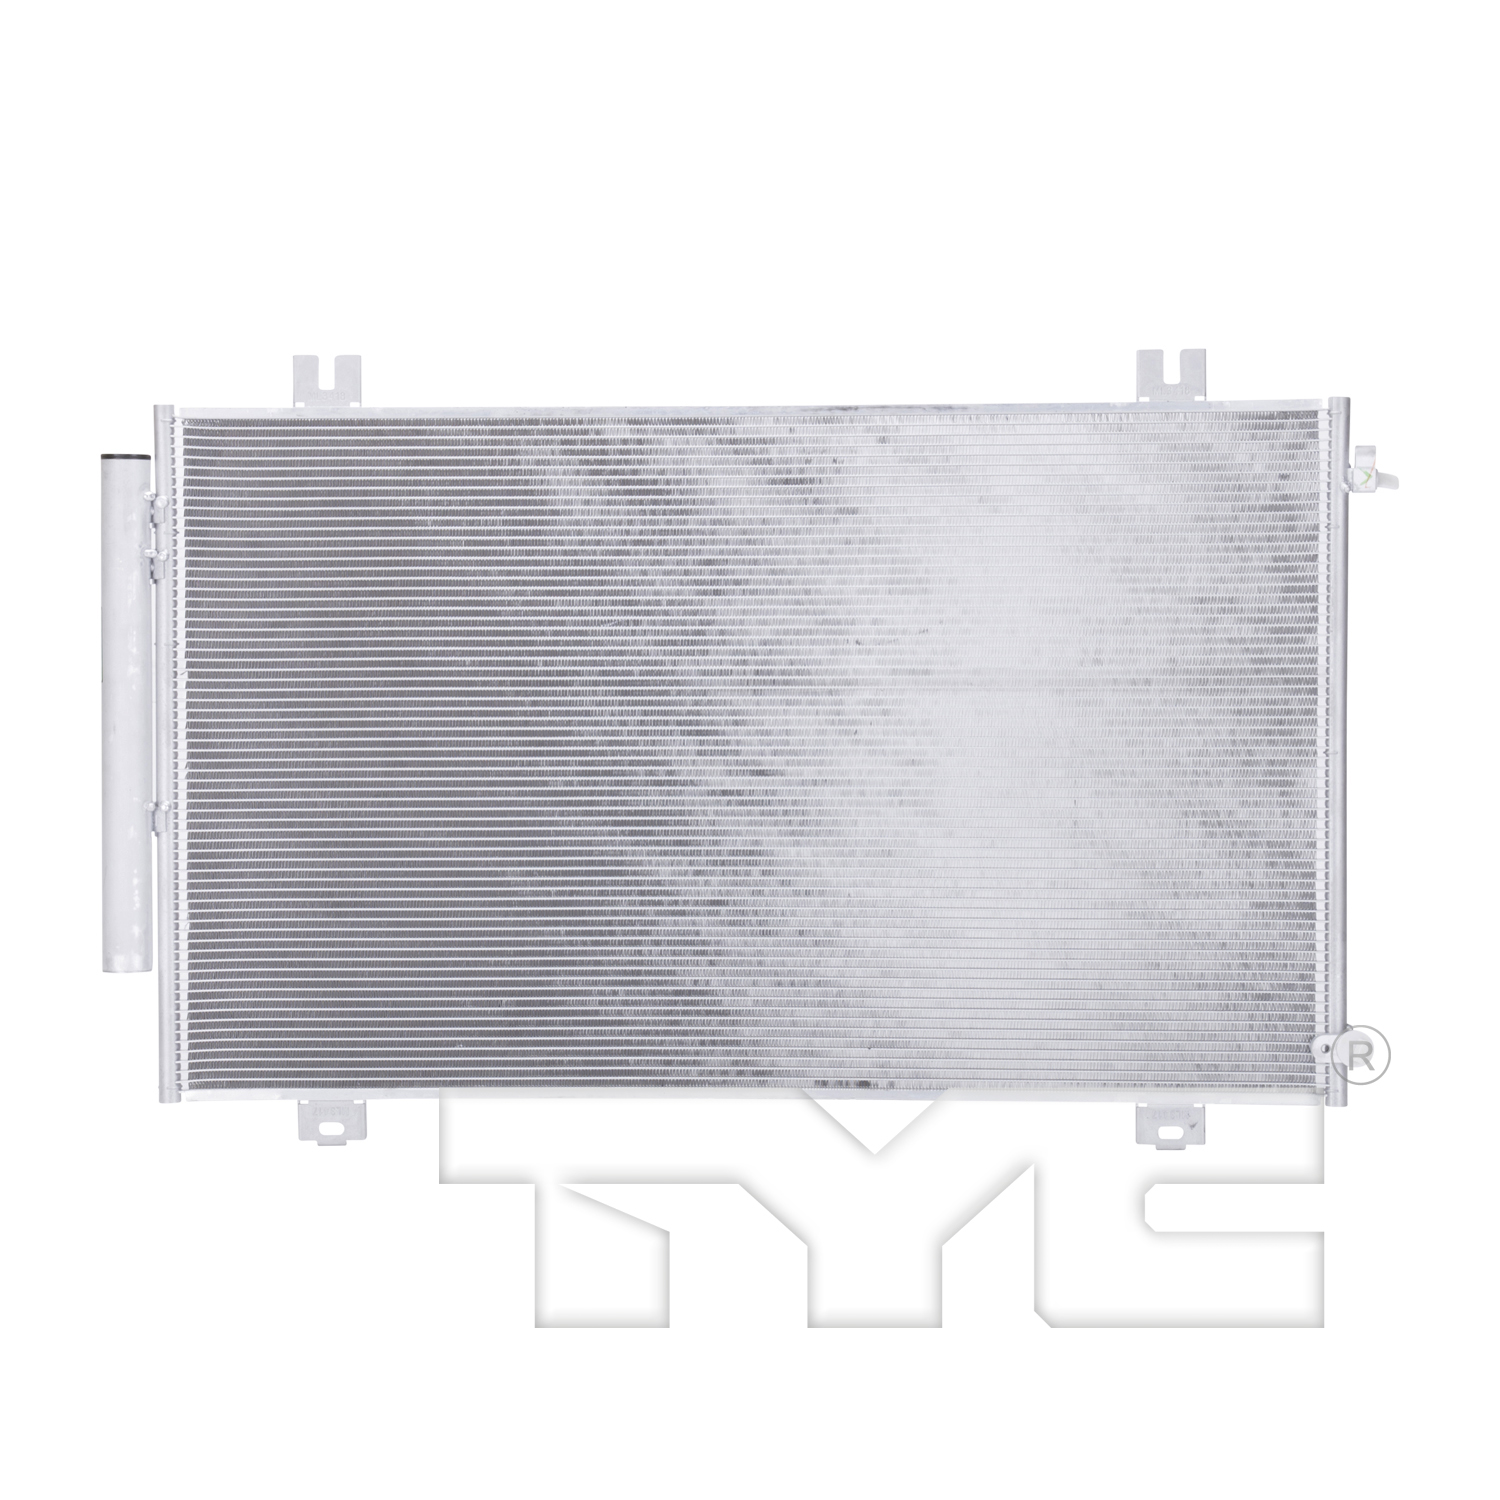 Aftermarket AC CONDENSERS for HONDA - ODYSSEY, ODYSSEY,18-23,Air conditioning condenser